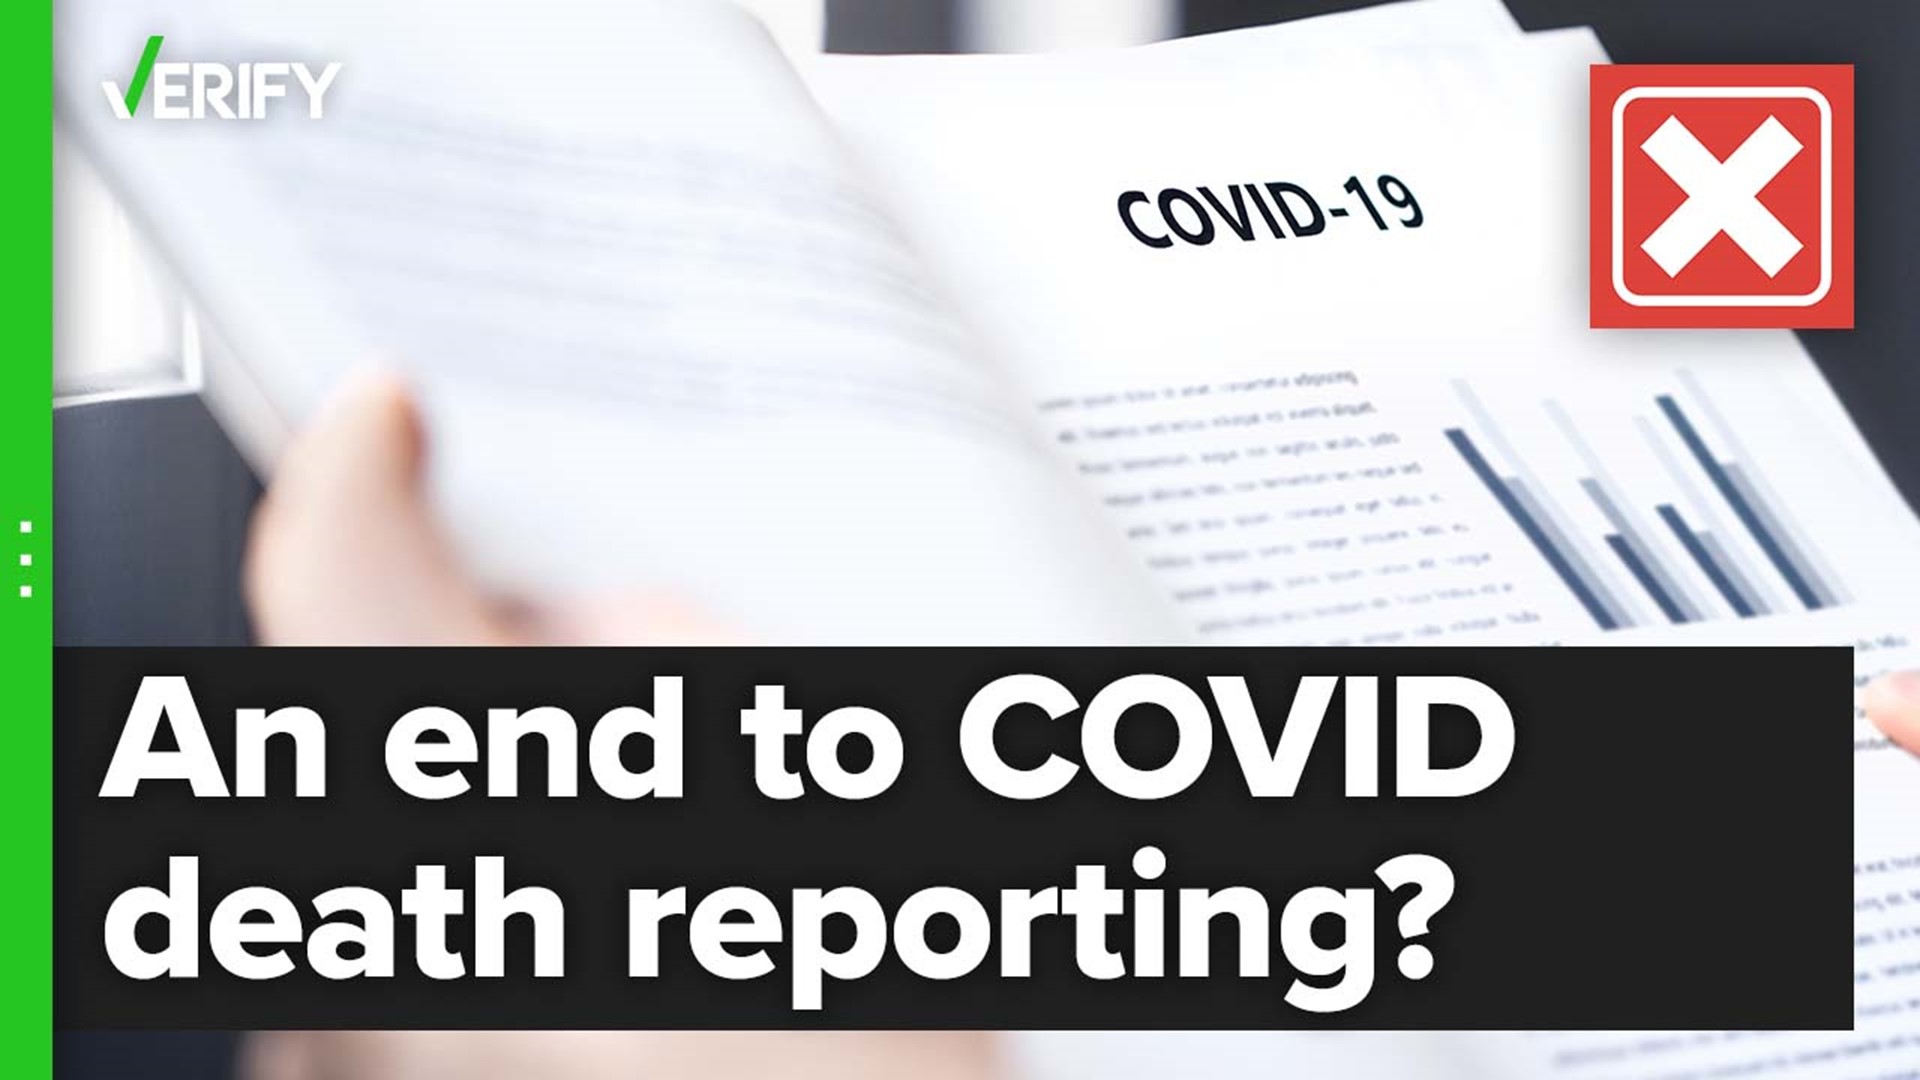 While a requirement that hospitals report COVID deaths to the federal government is being phased out, the change does not impact the CDC's data.